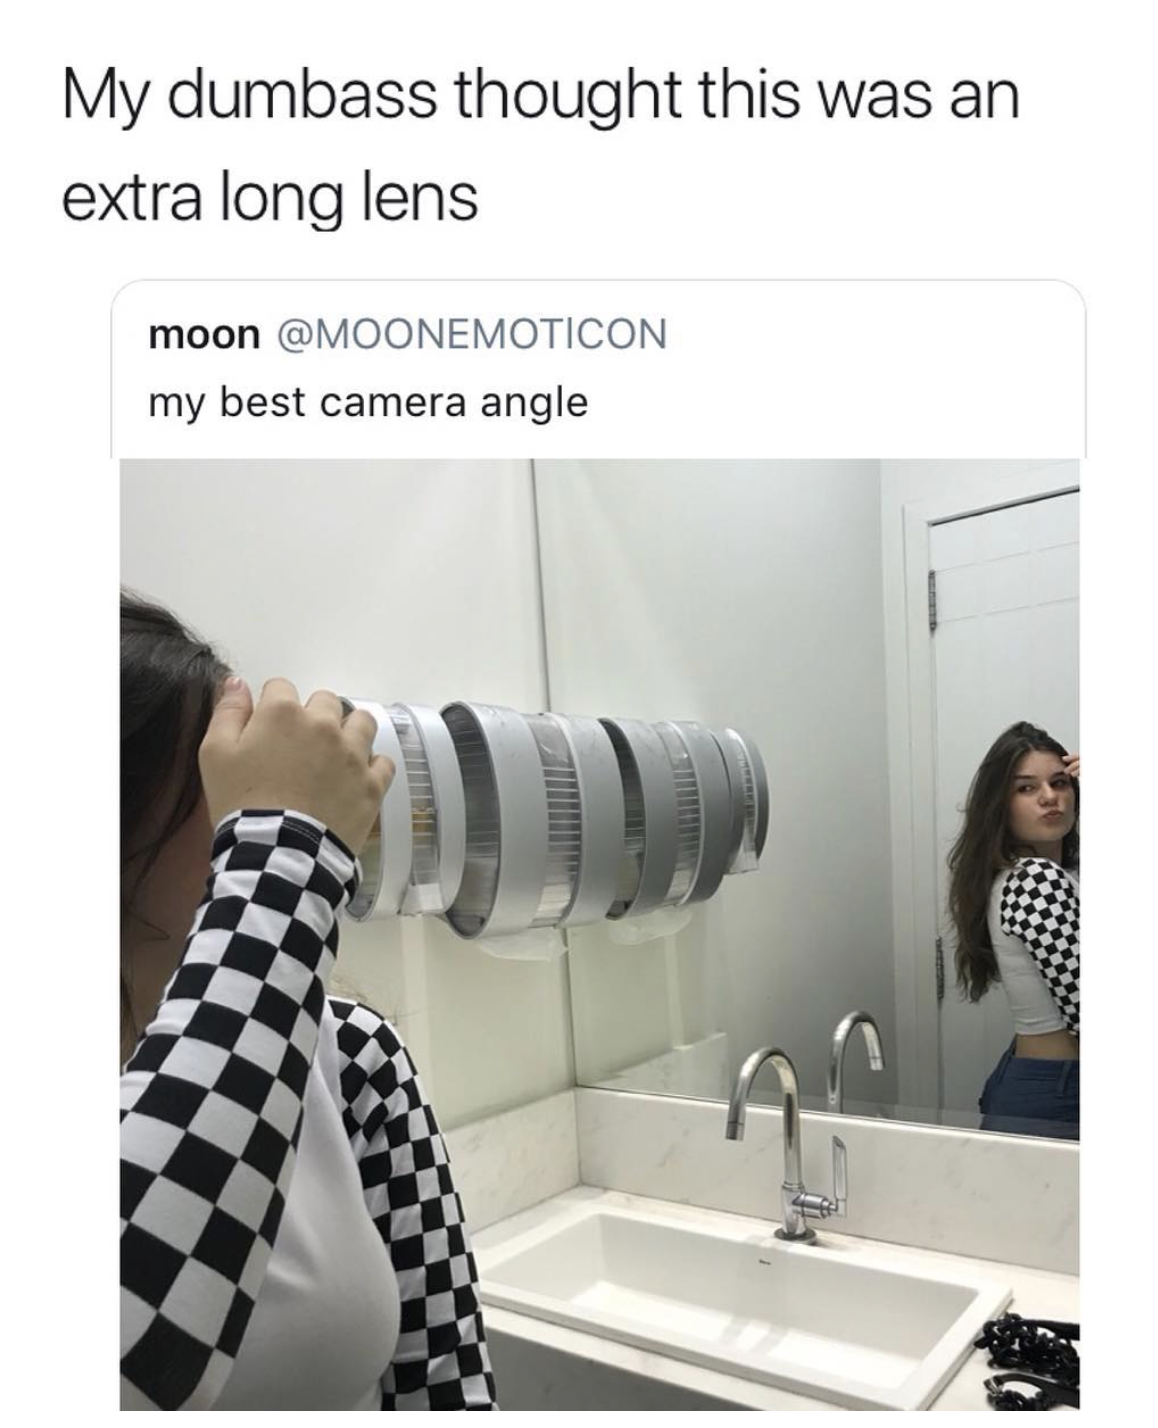 memes - camera angle meme - My dumbass thought this was an extra long lens moon my best camera angle